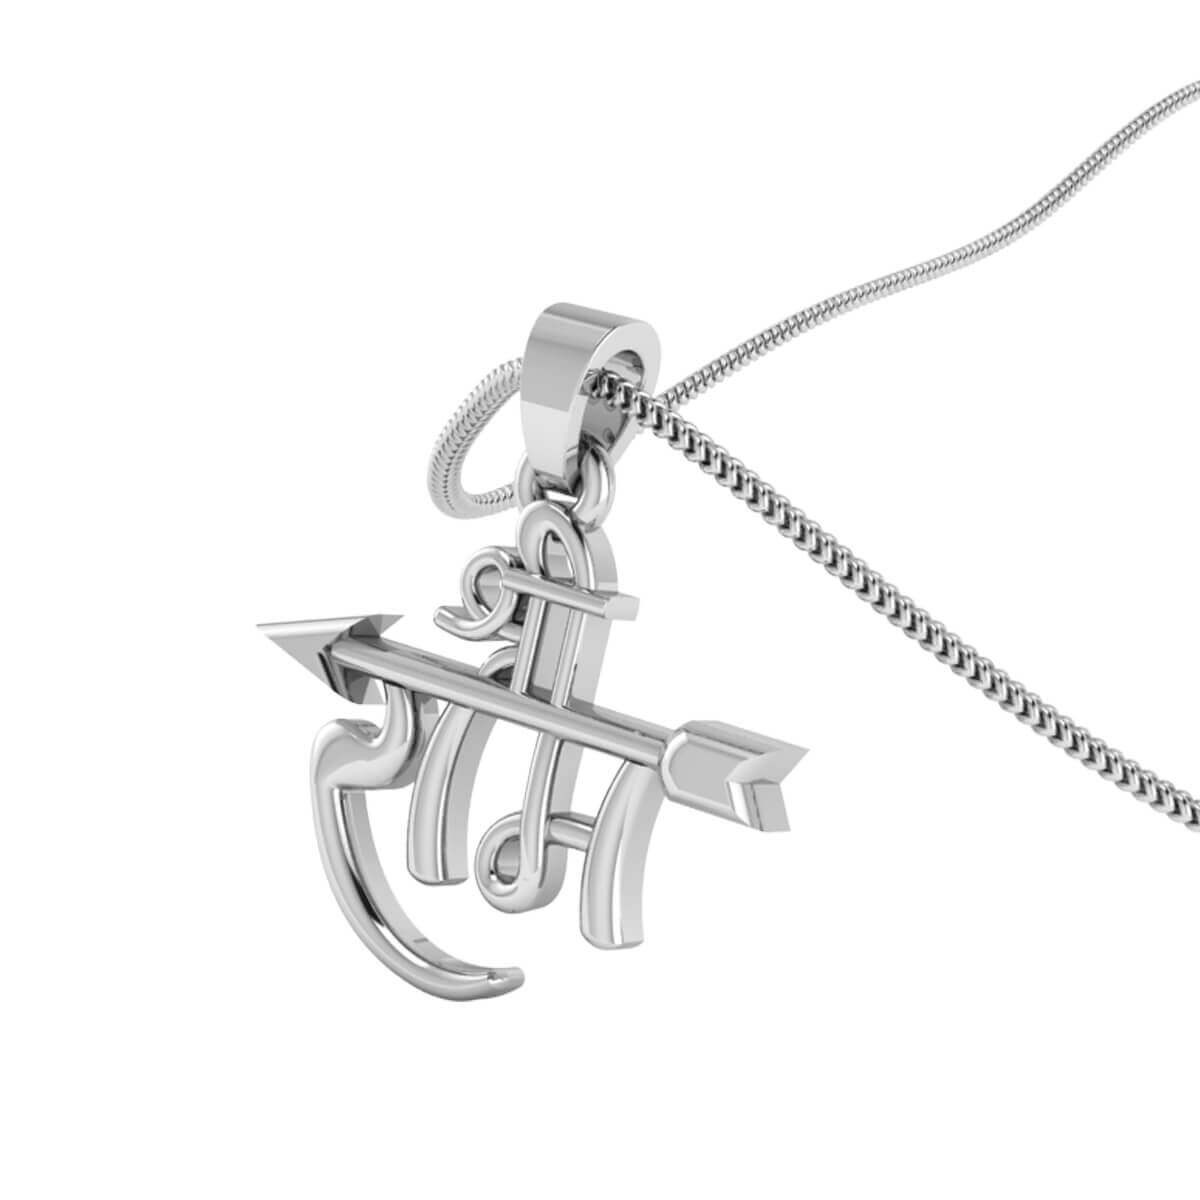 Shree Ram Silver Pendant with link chain – Buy Spiritual Products